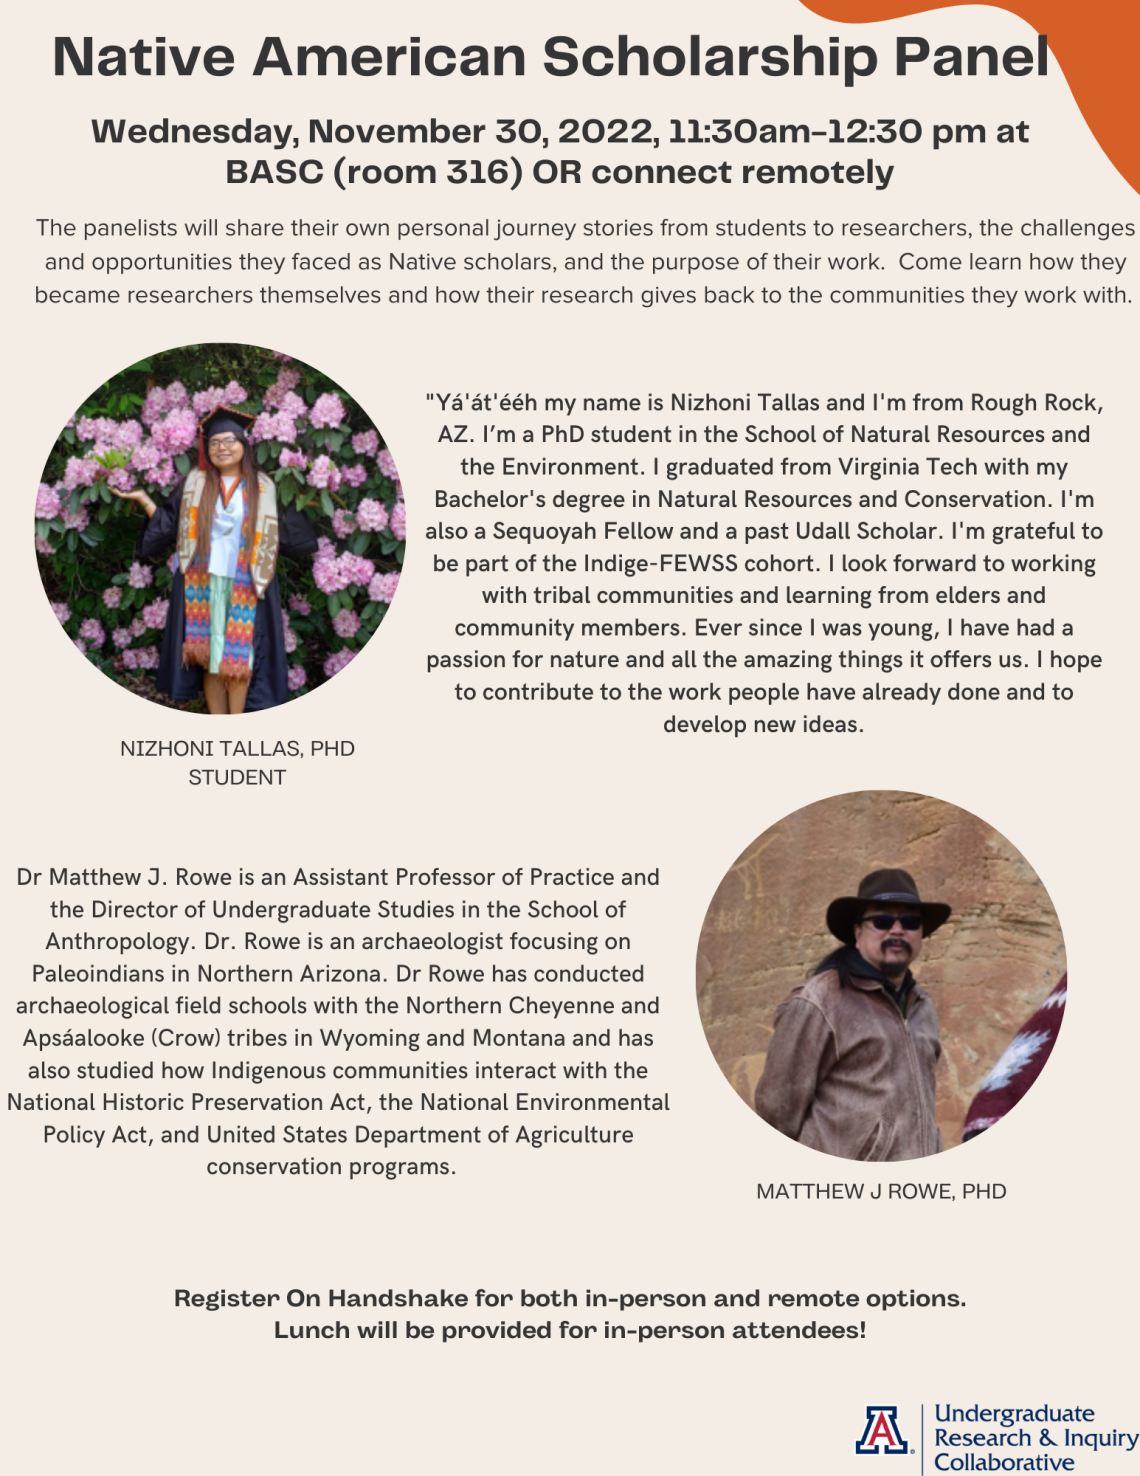 An announcement for a Native American Scholarship Panel featuring Dr. Matthew Rowe and PhD student Nihzoni Tallas, November 30 from 11:30 am to 12:30 pm